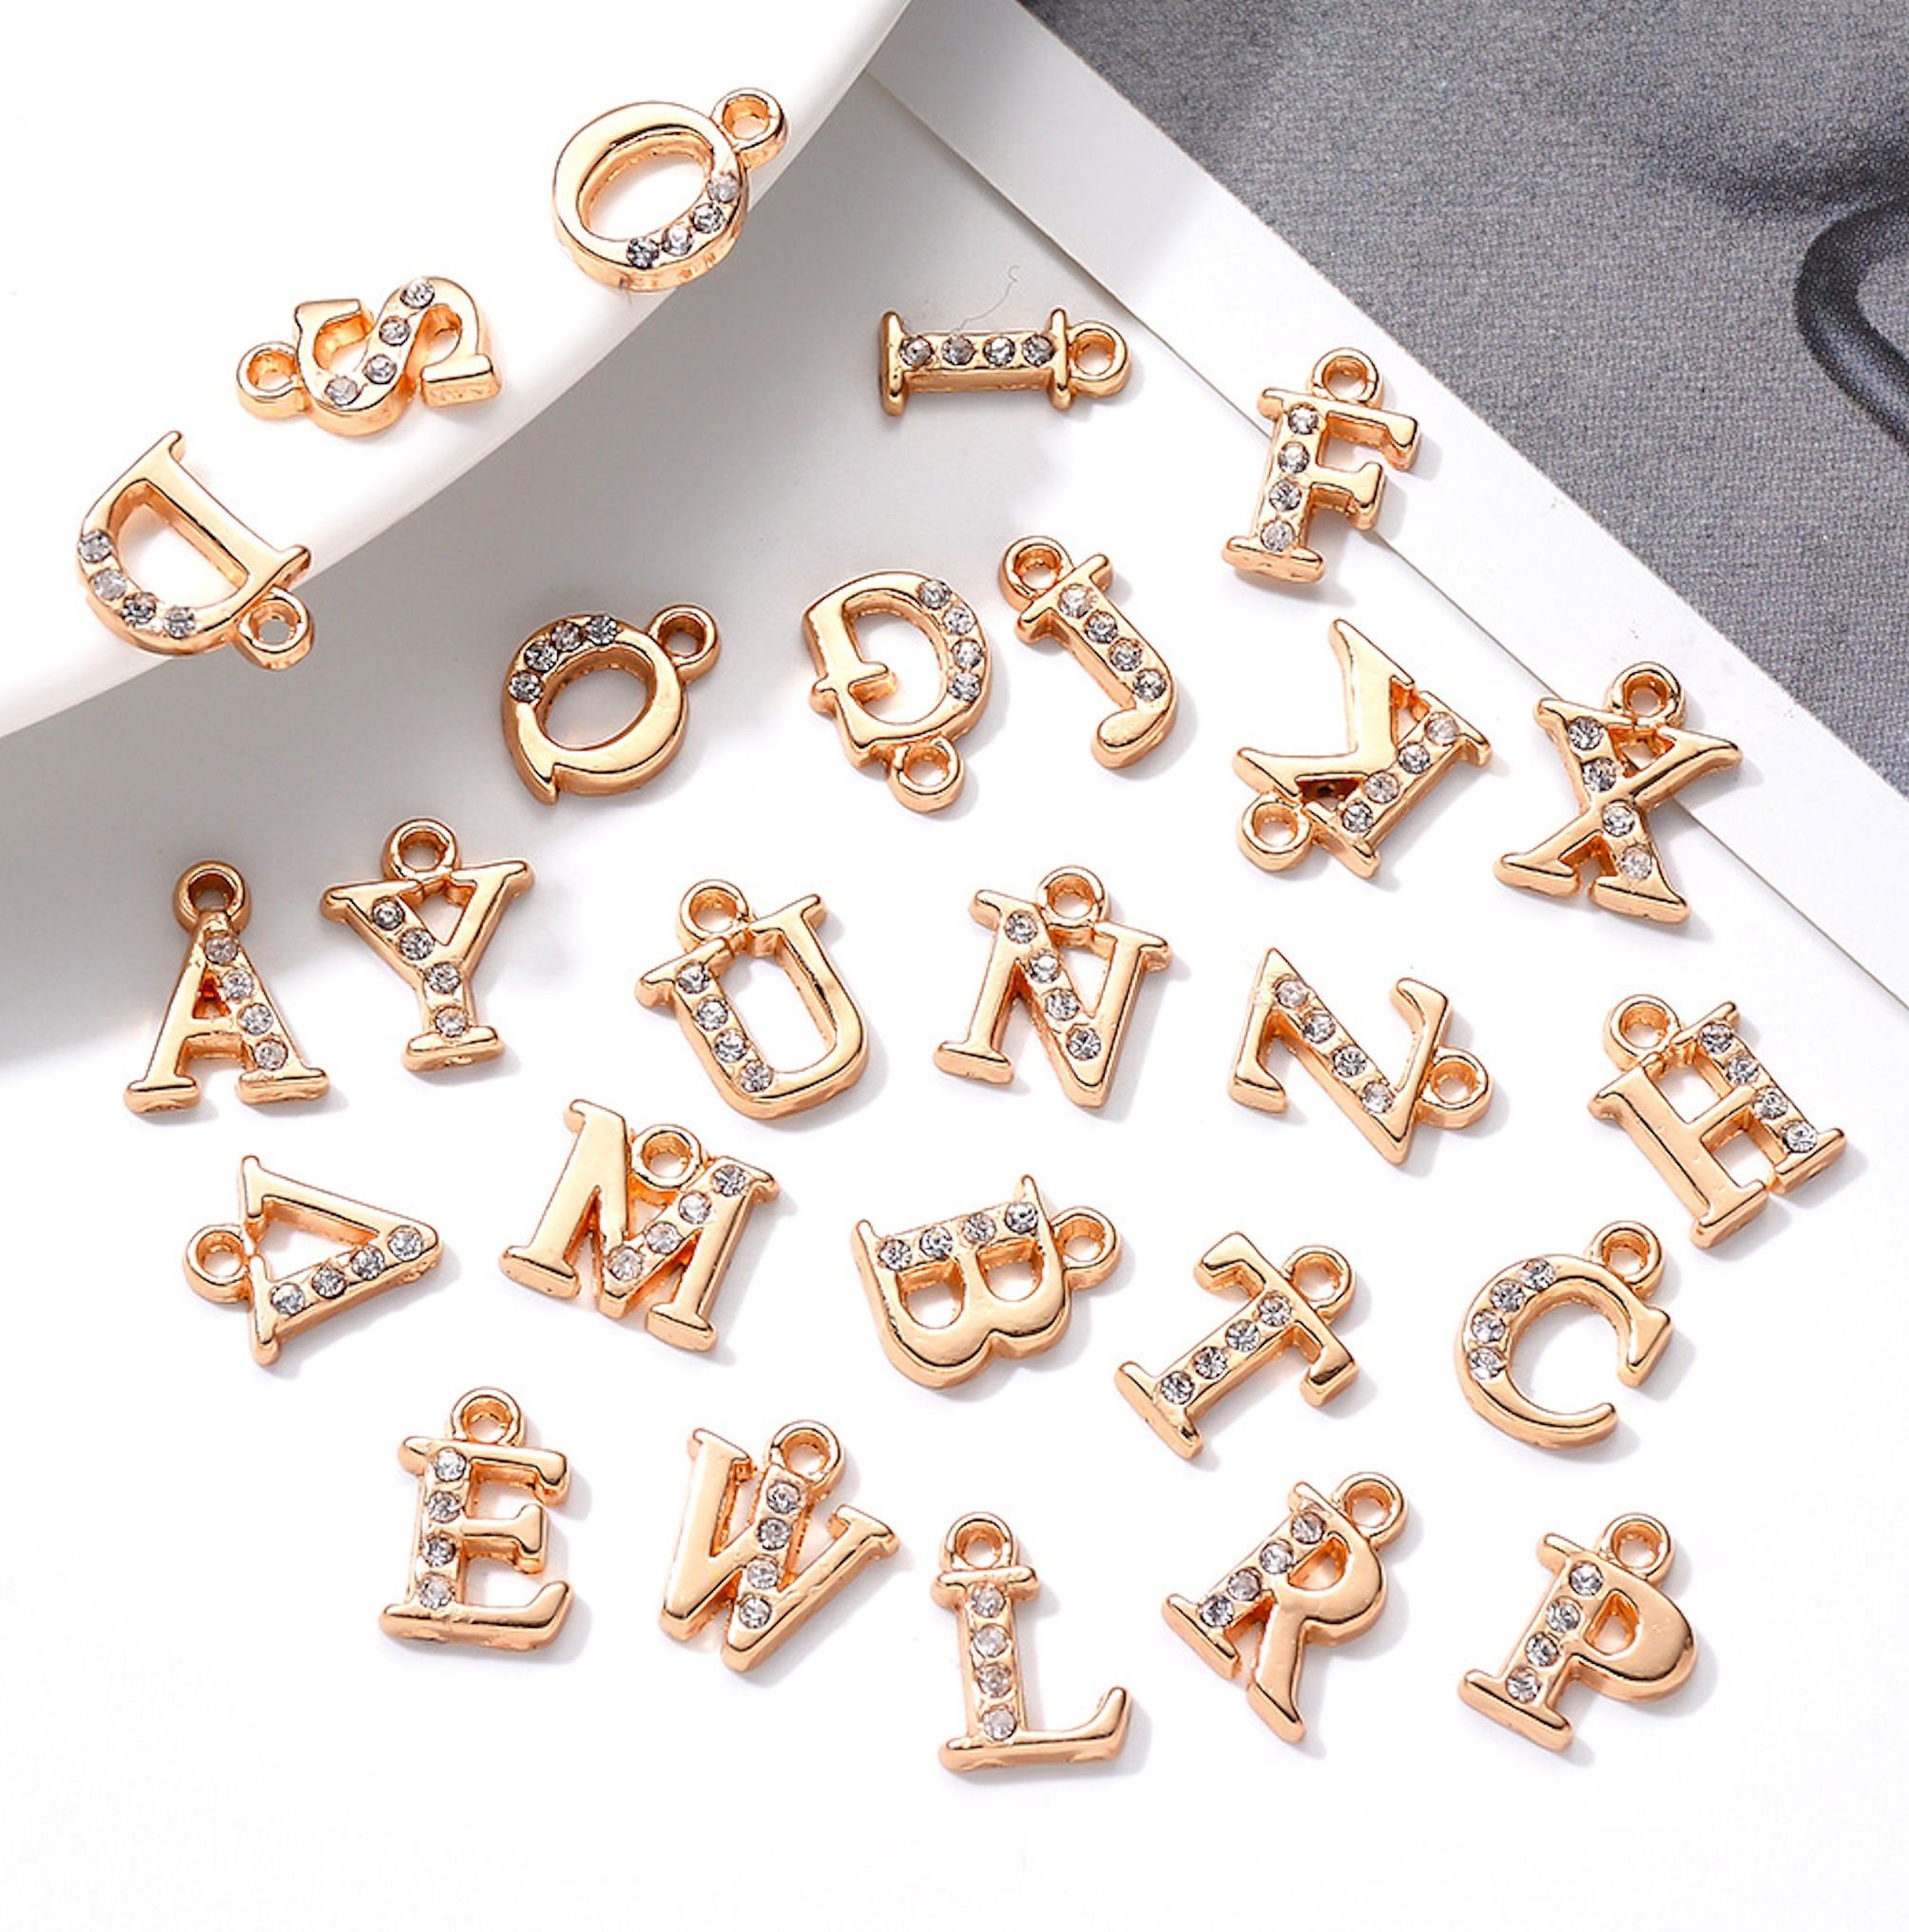 26 Alphabet Letters Set-1 Loop Gold Plated Letter Charms W/ | Etsy